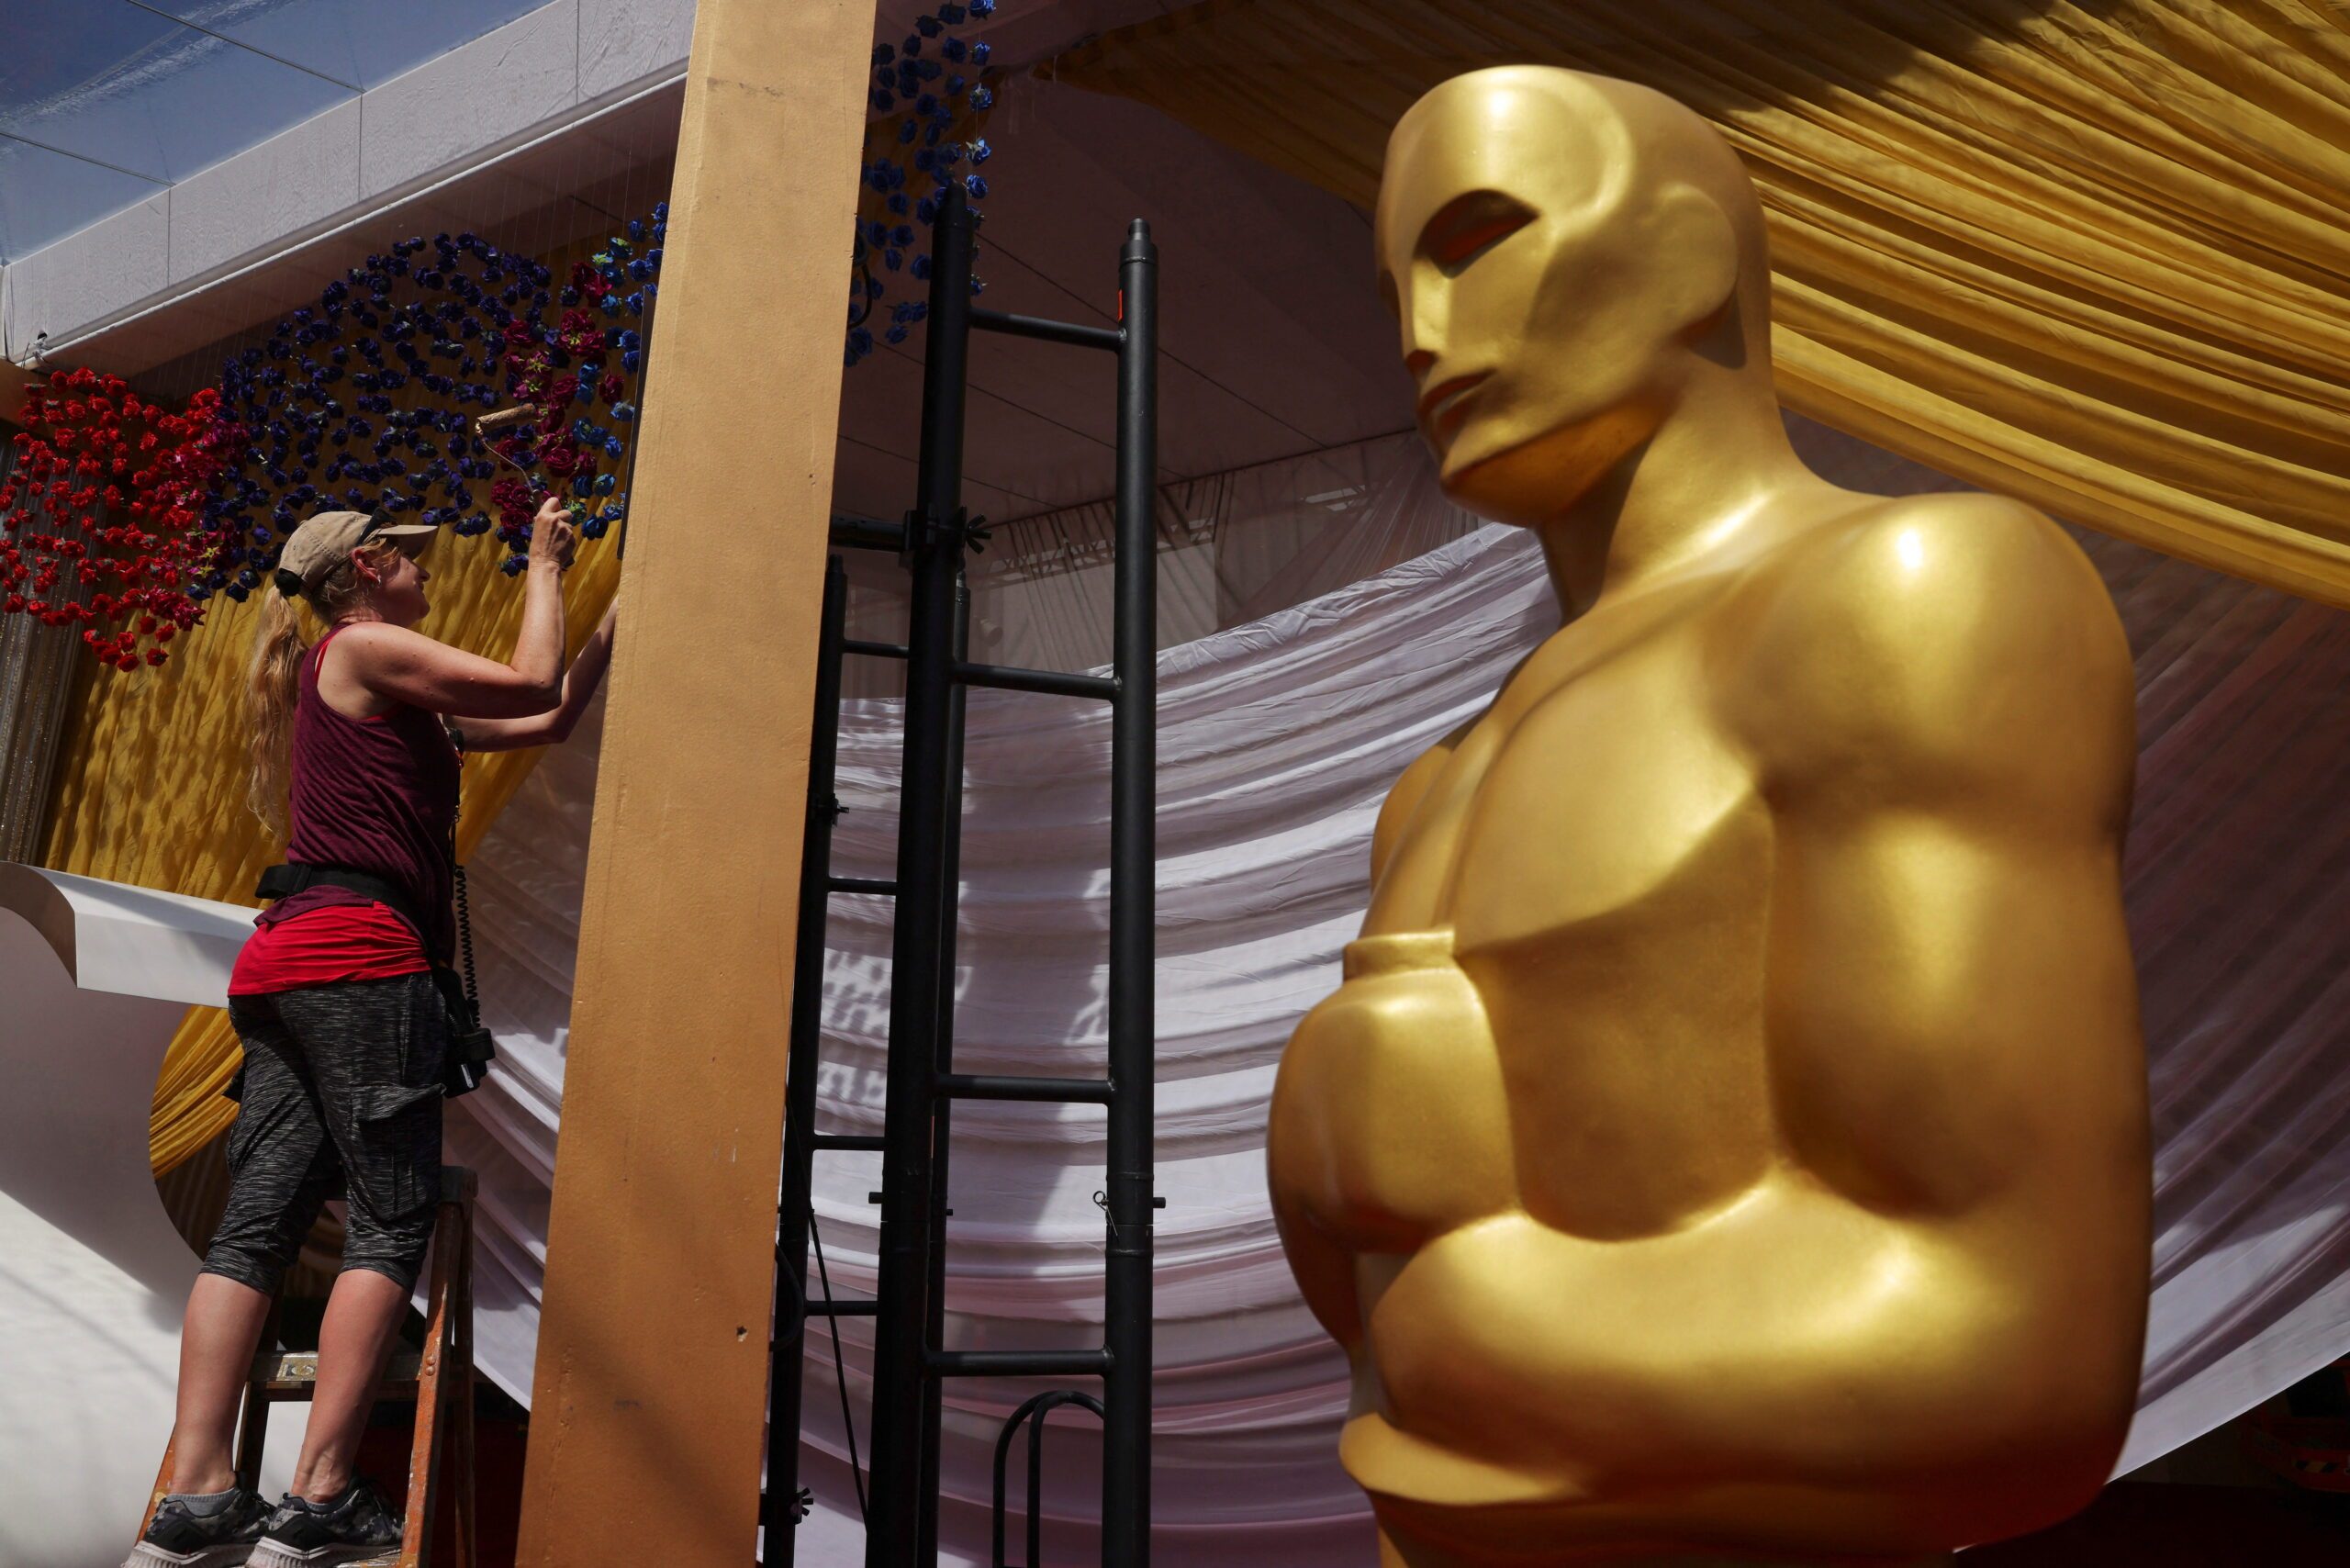 [OPINION] The Oscars shouldn’t matter for developing nations